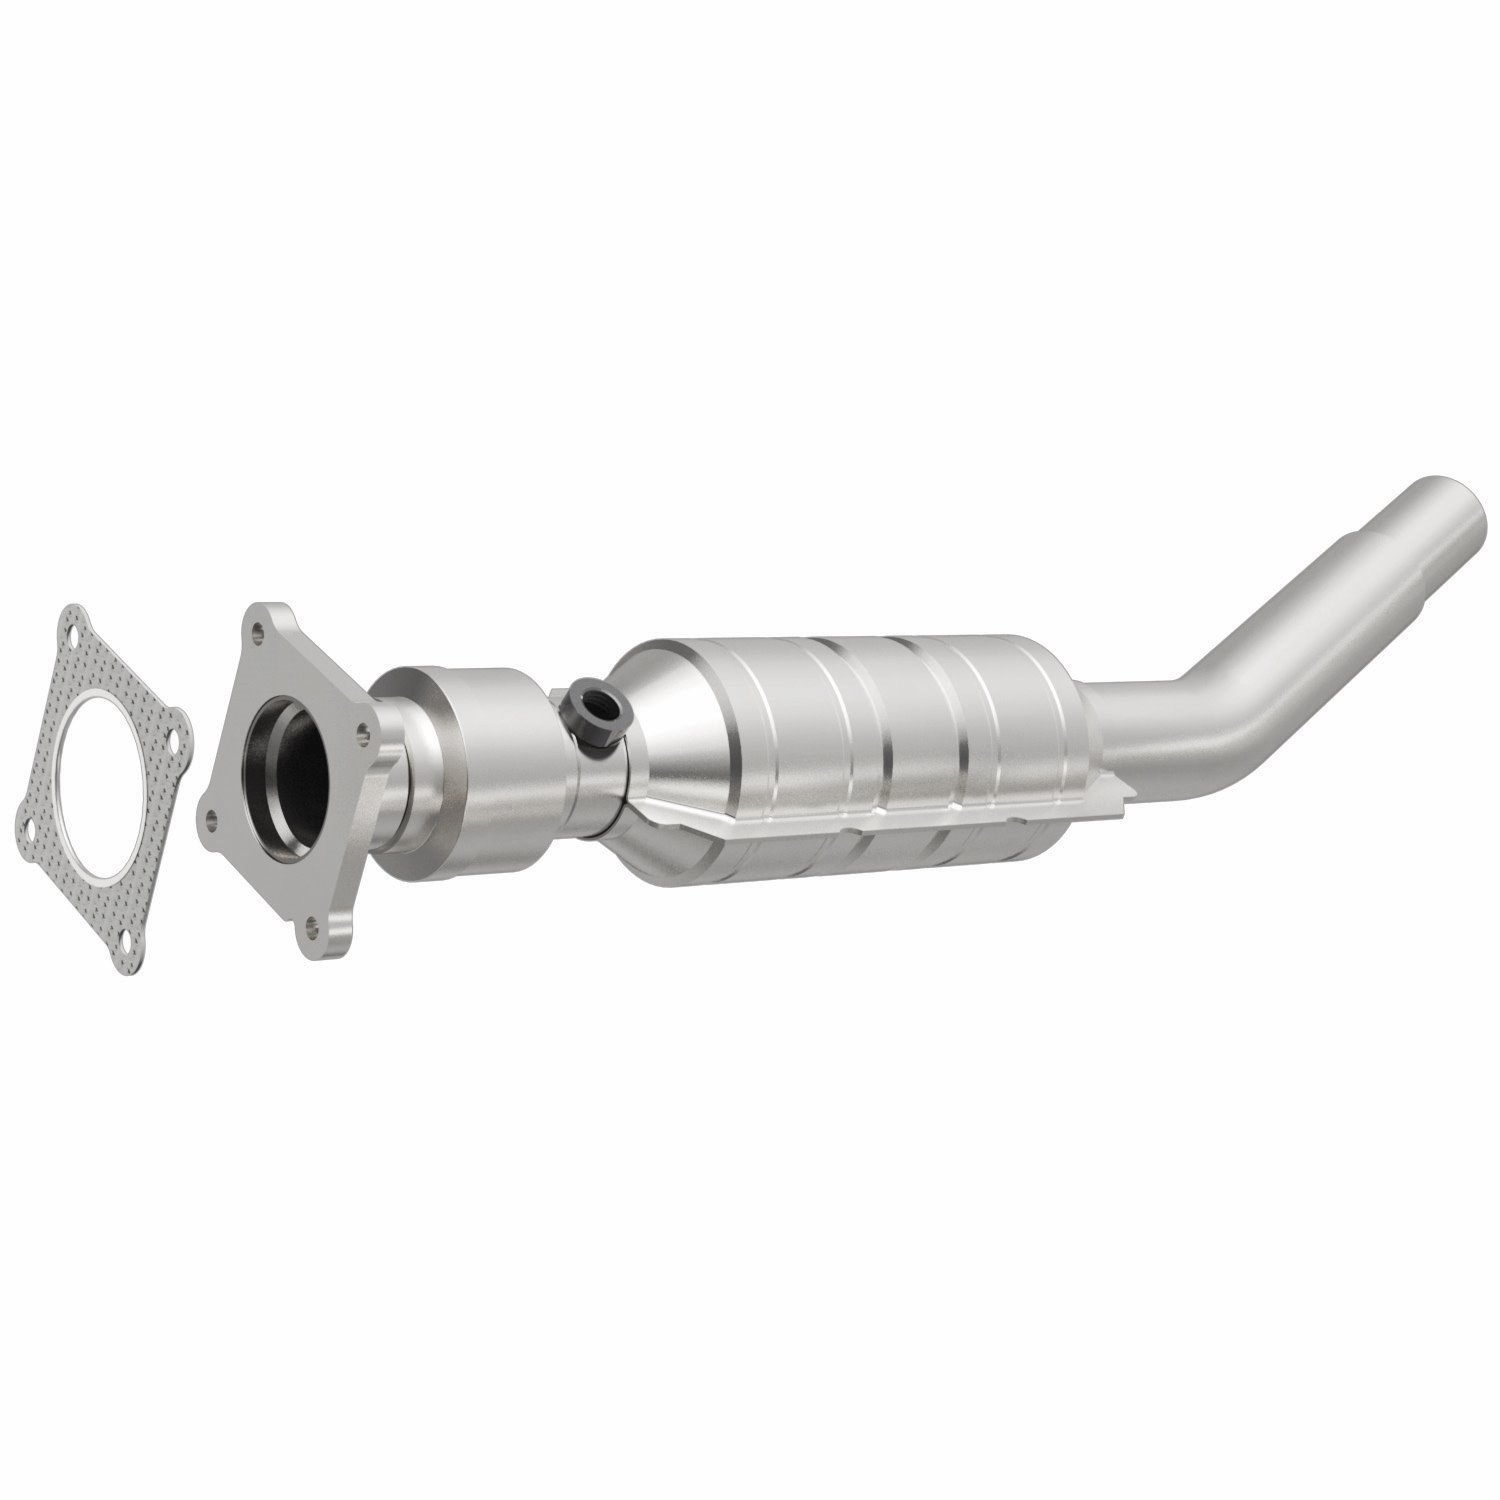 HM Grade Federal / EPA Compliant Direct-Fit Catalytic Converter 24296